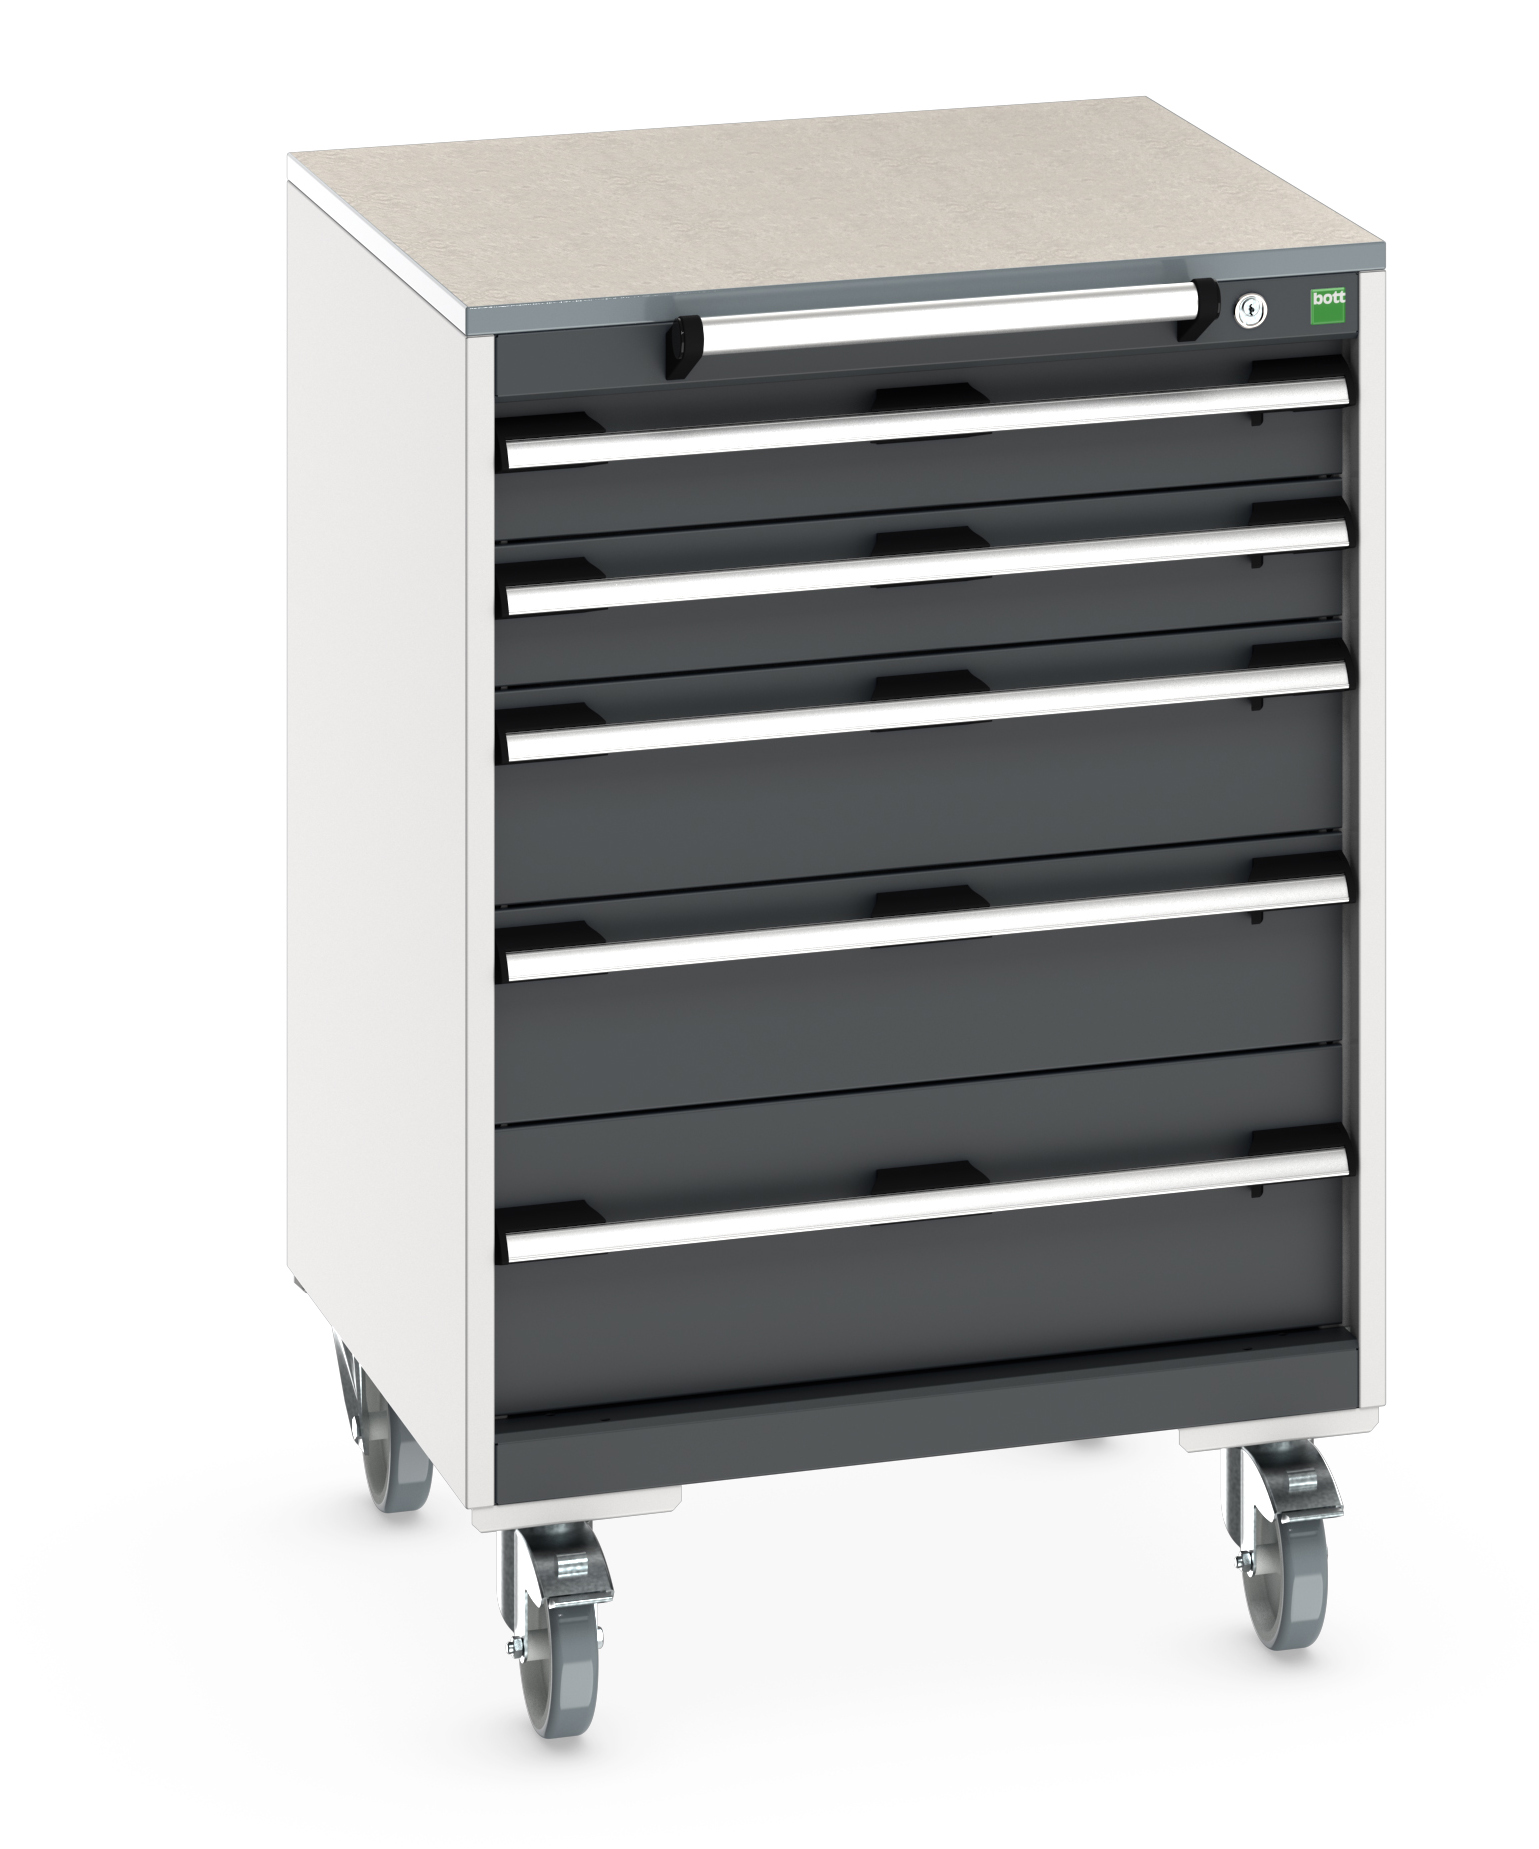 Bott Cubio Mobile Drawer Cabinet With 5 Drawers & Lino Worktop - 40402150.19V